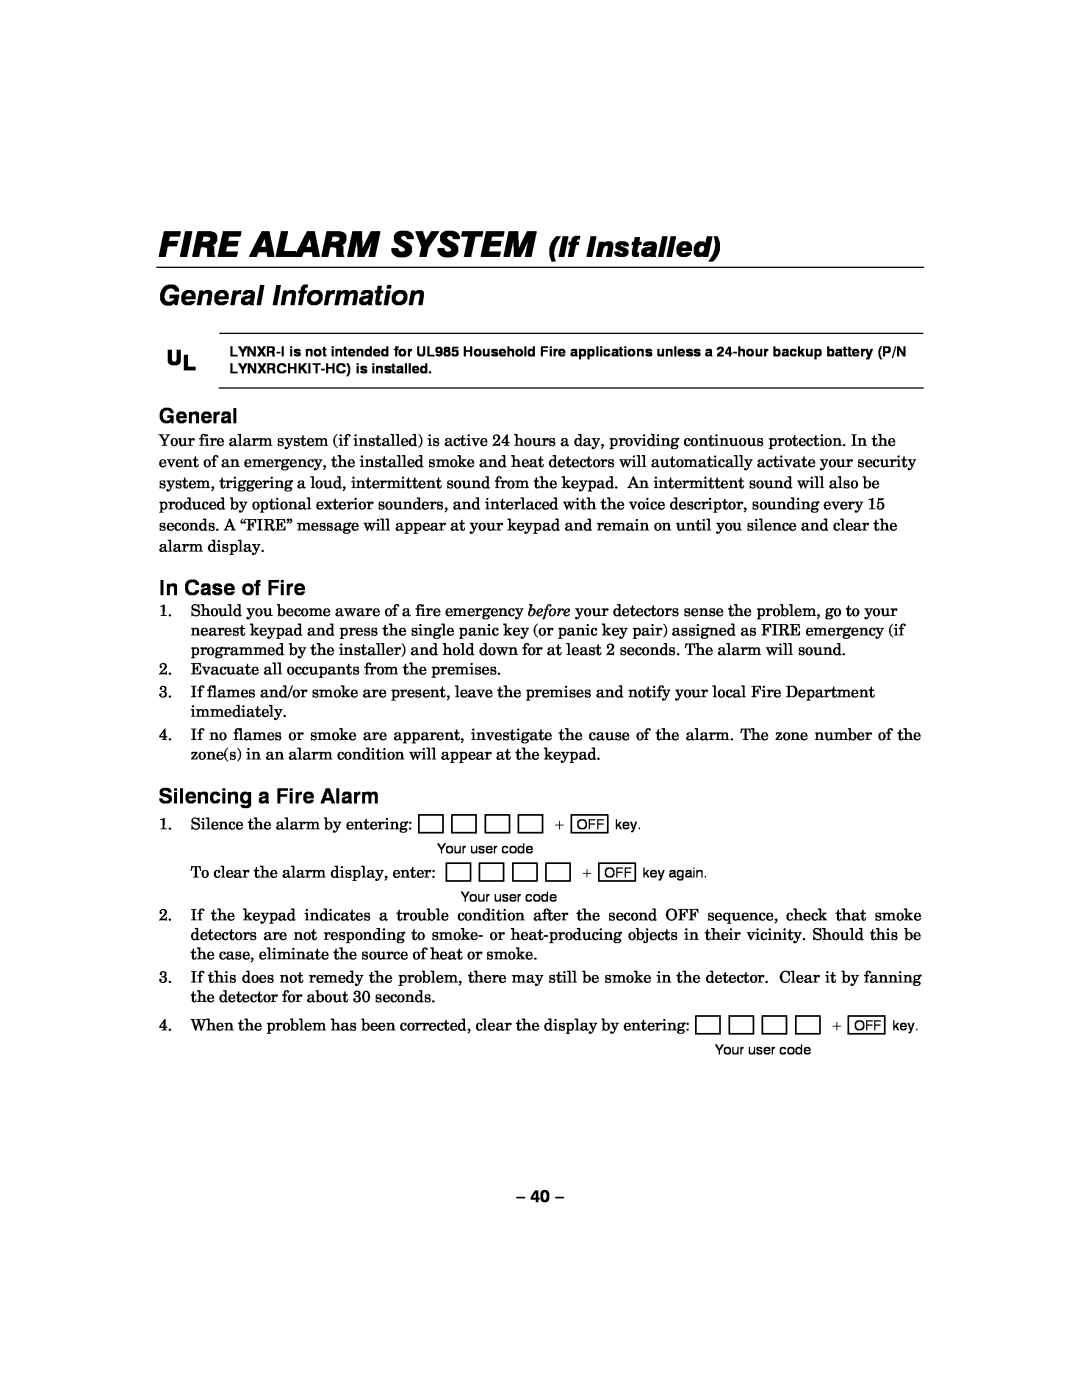 Honeywell LYNXR-I manual FIRE ALARM SYSTEM If Installed, General Information, In Case of Fire, Silencing a Fire Alarm 